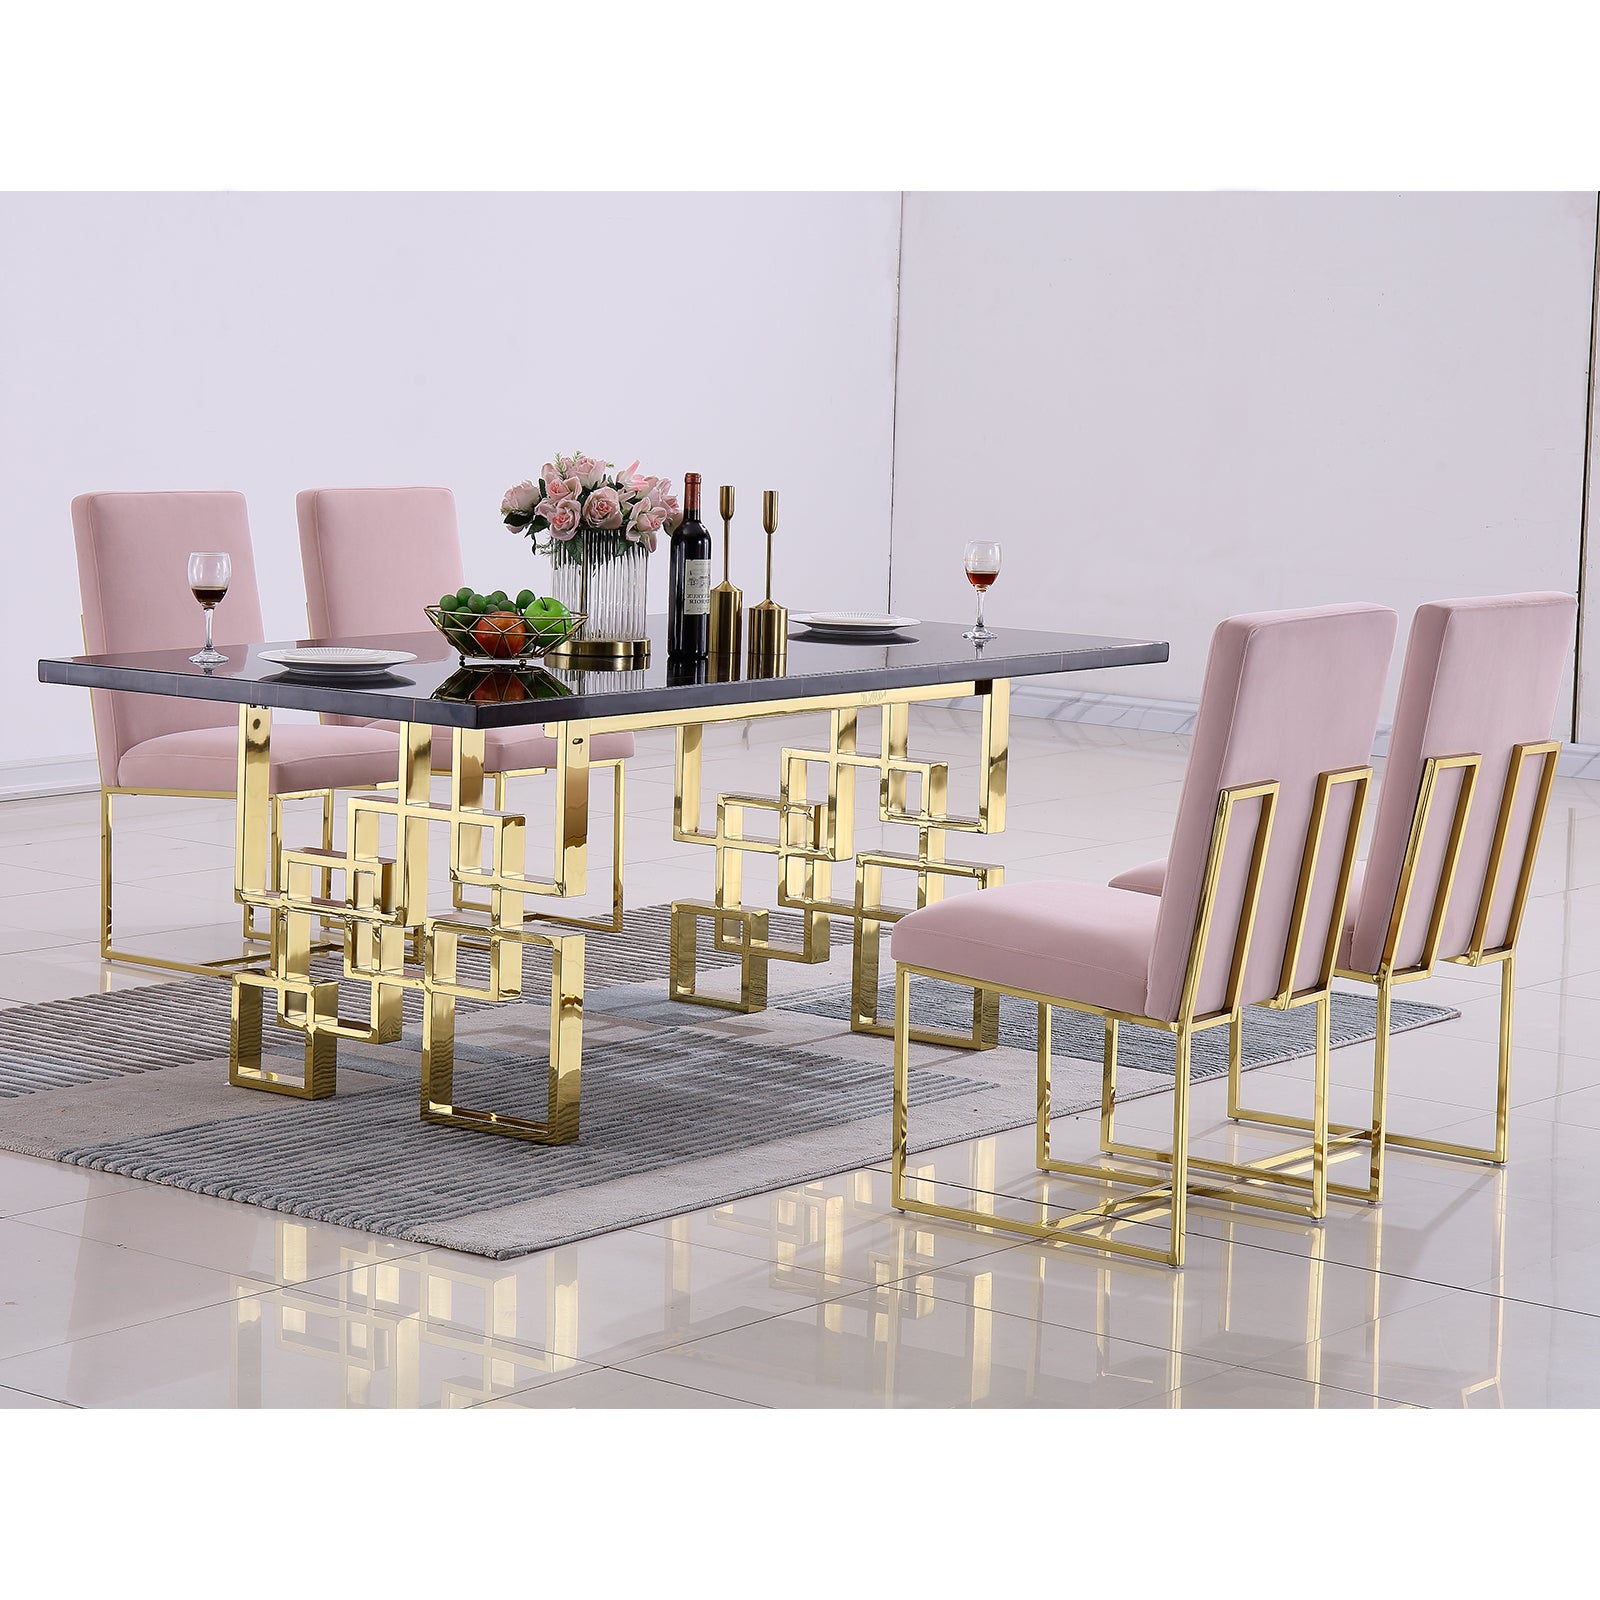 Pink Dining Chairs | Square backrest| Metal sled base | C148